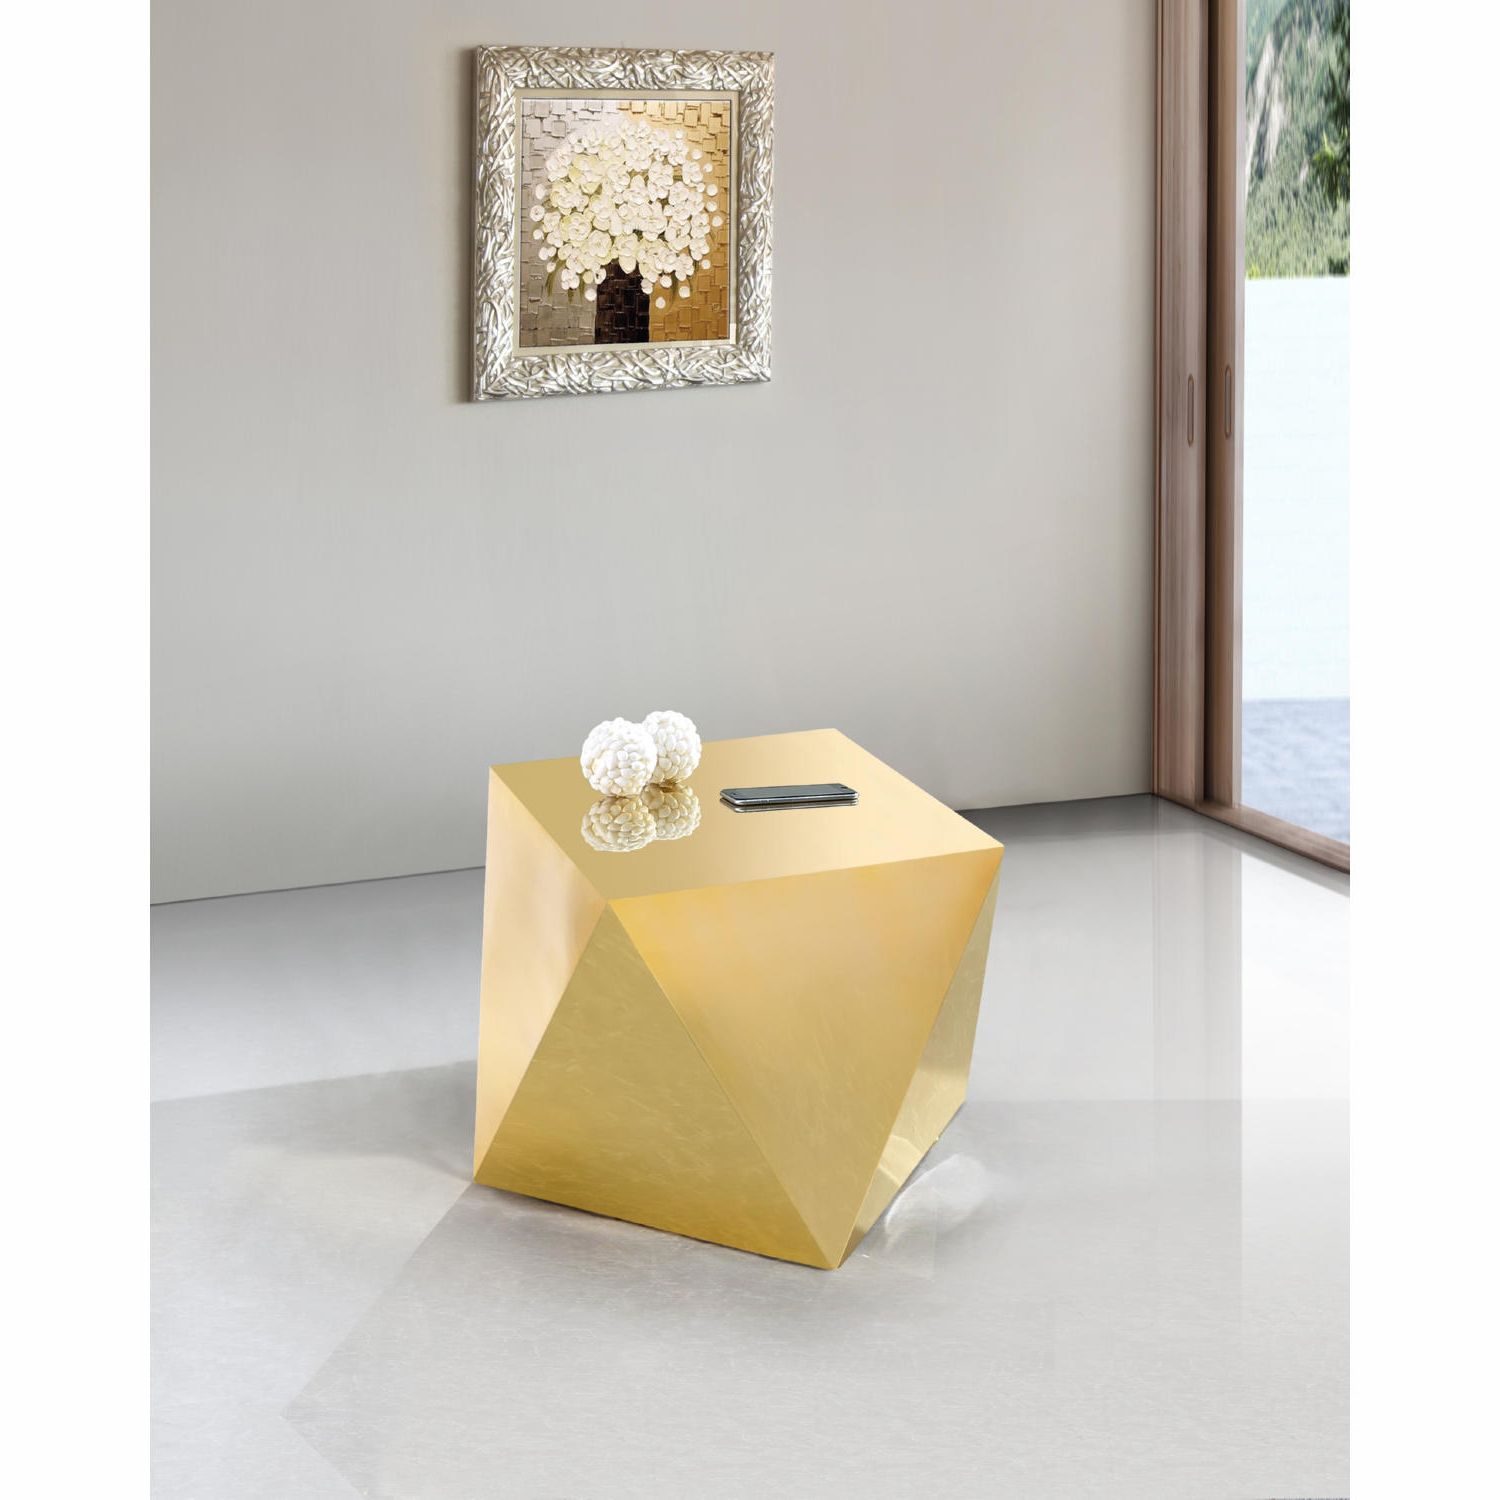 Meridian 222gold E Gemma Diamond Shape End Table In Gold Stainless Steel For Well Known Diamond Shape Coffee Tables (View 6 of 20)